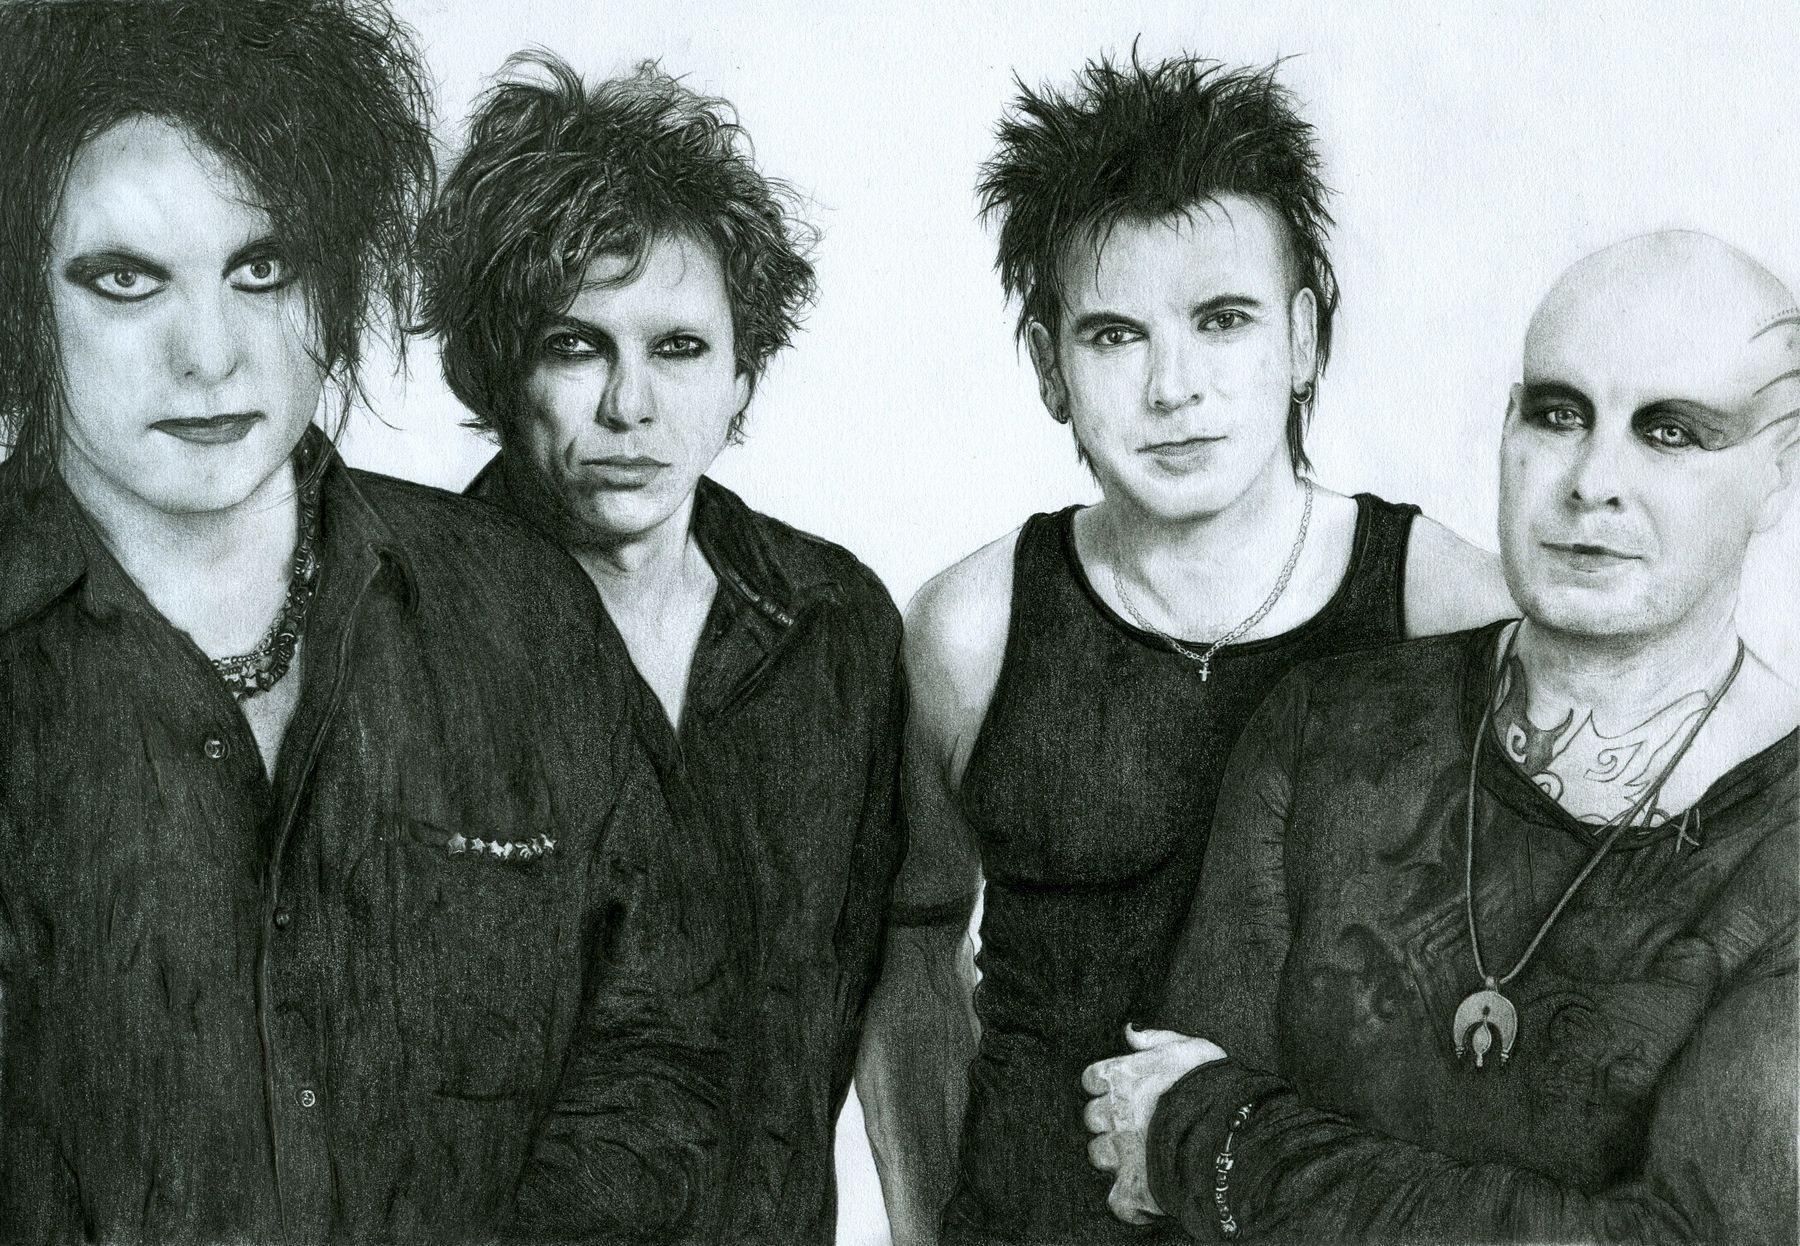 The Cure Wallpaper,The Cure Band Wallpapers And Desktop Backgrounds.